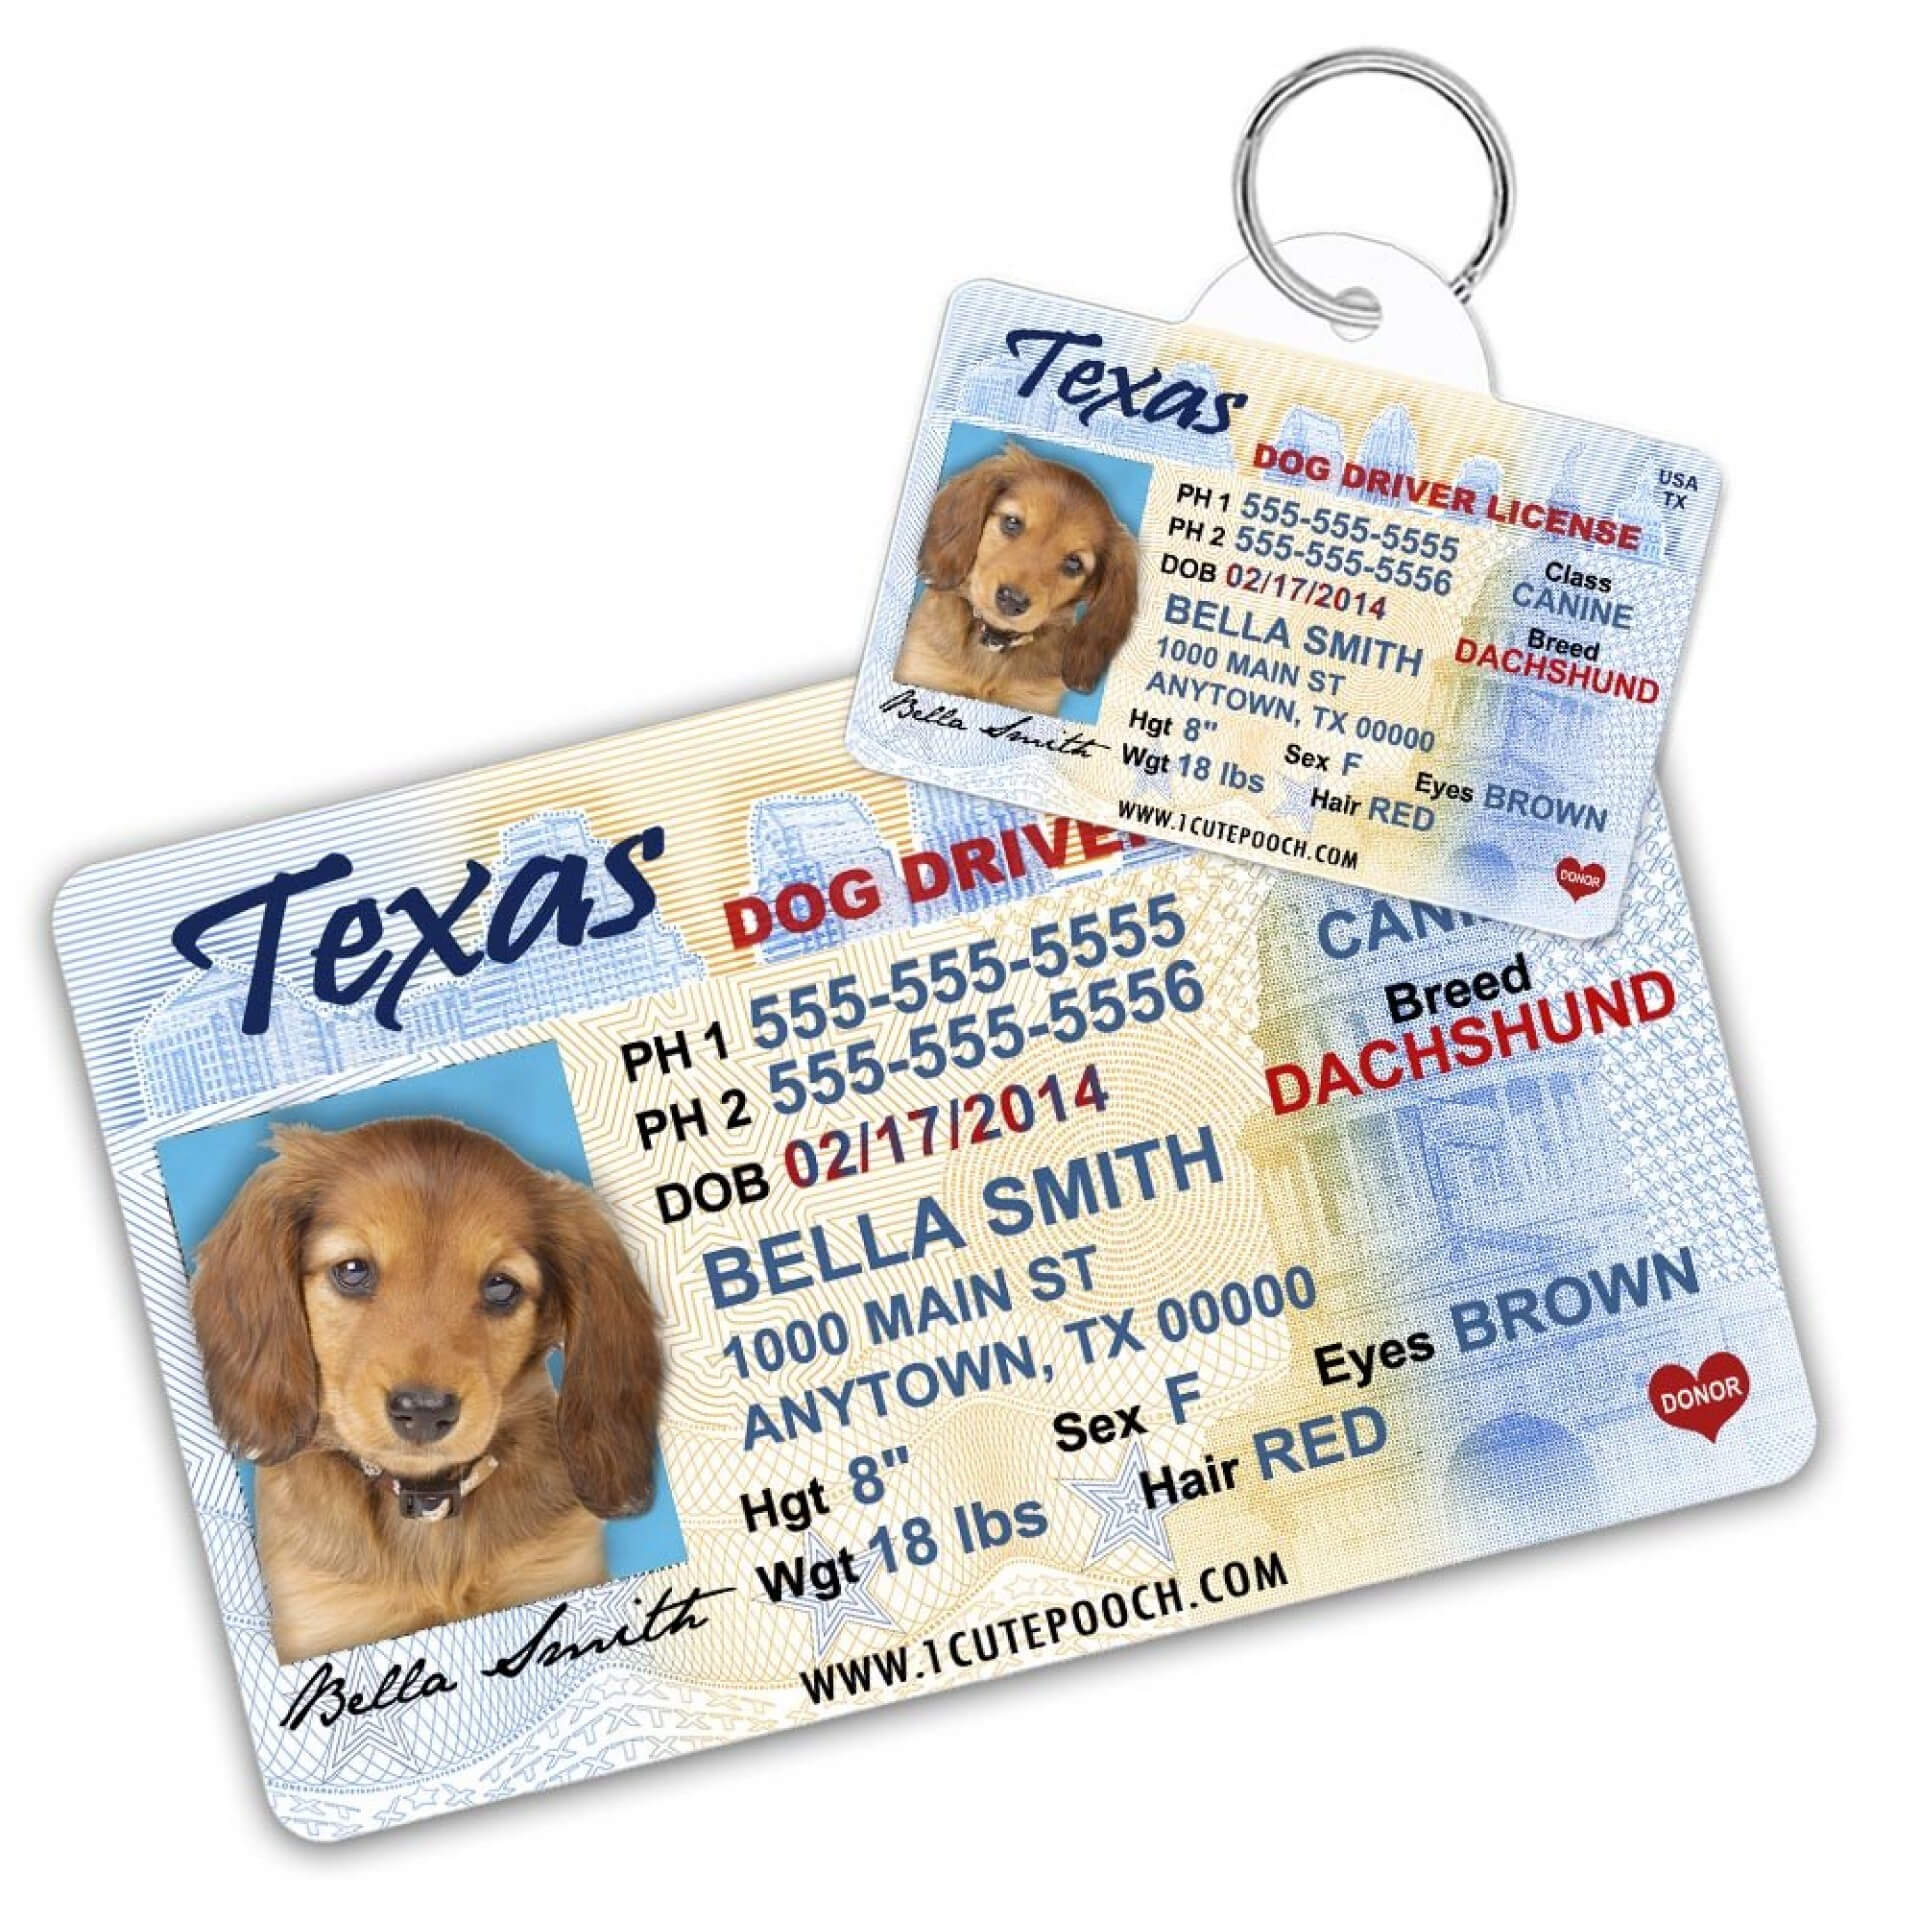 043 Printable Service Dog Id Card Template Staggering Ideas Throughout Texas Id Card Template